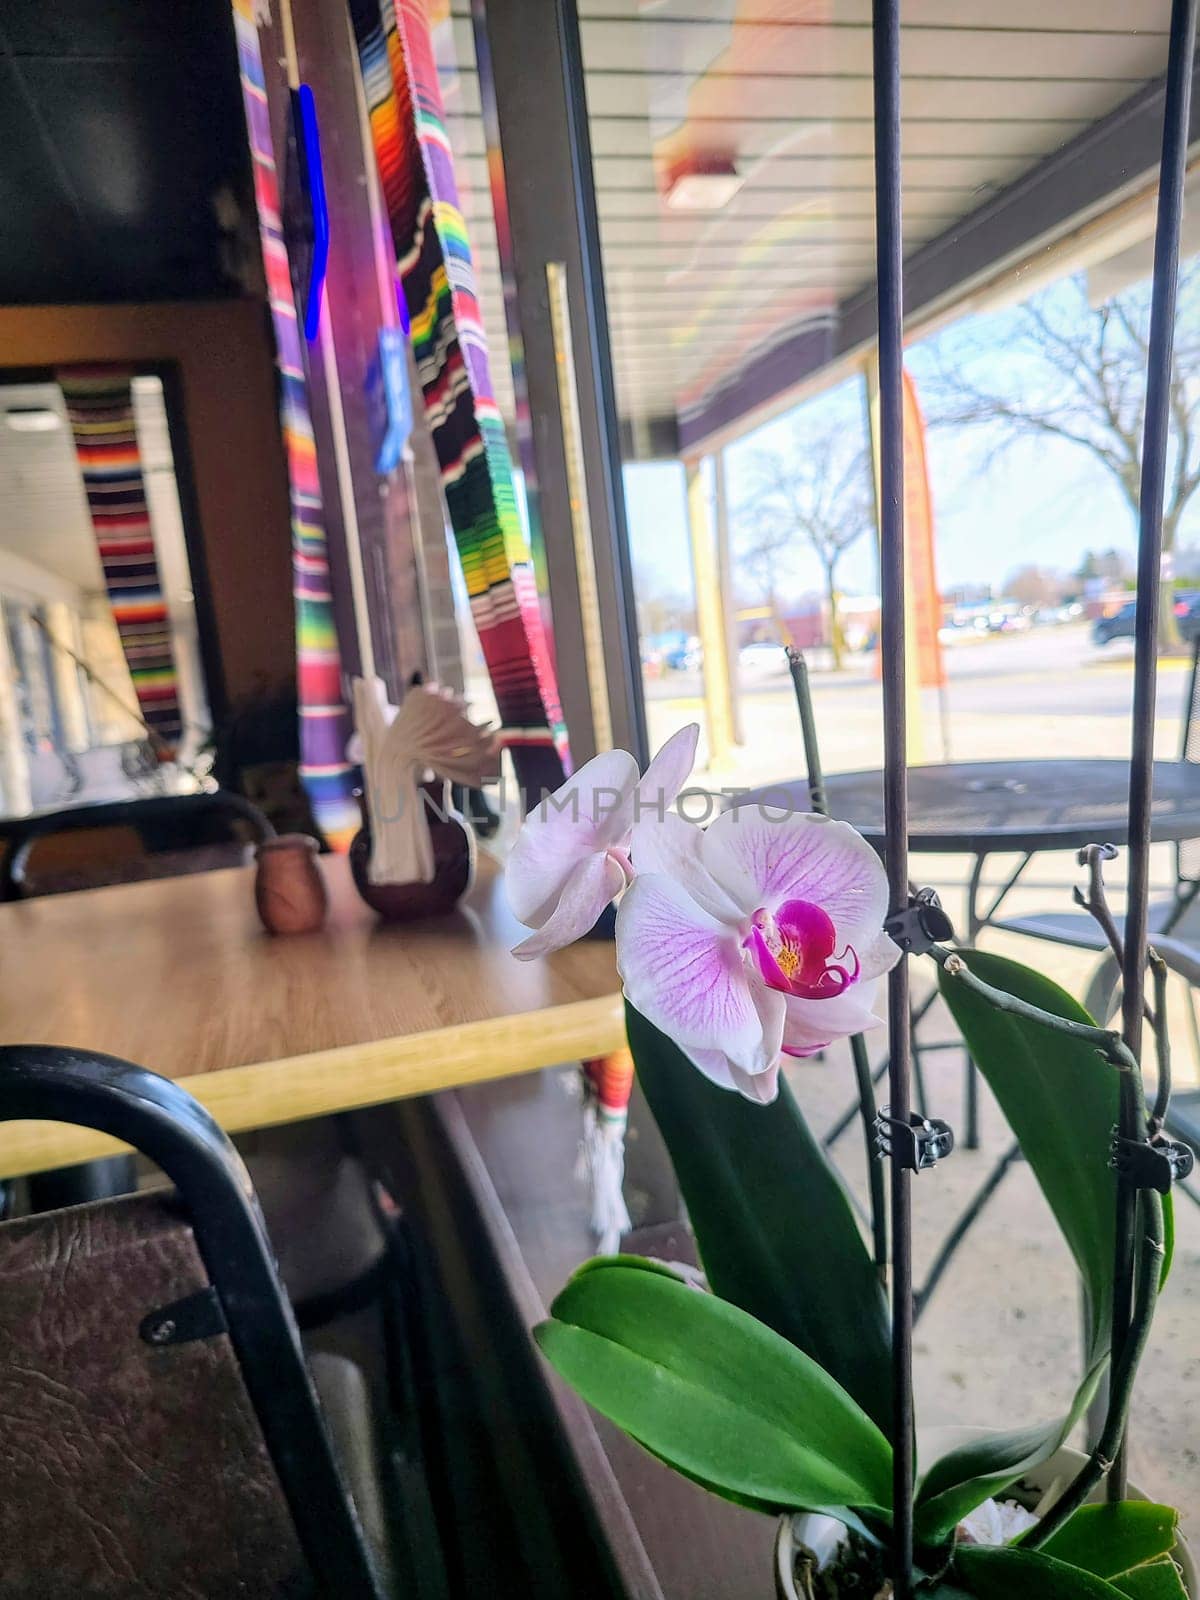 Serene cafe scene with a vibrant orchid and colorful decor, overlooking a sunny suburban view in Fort Wayne.